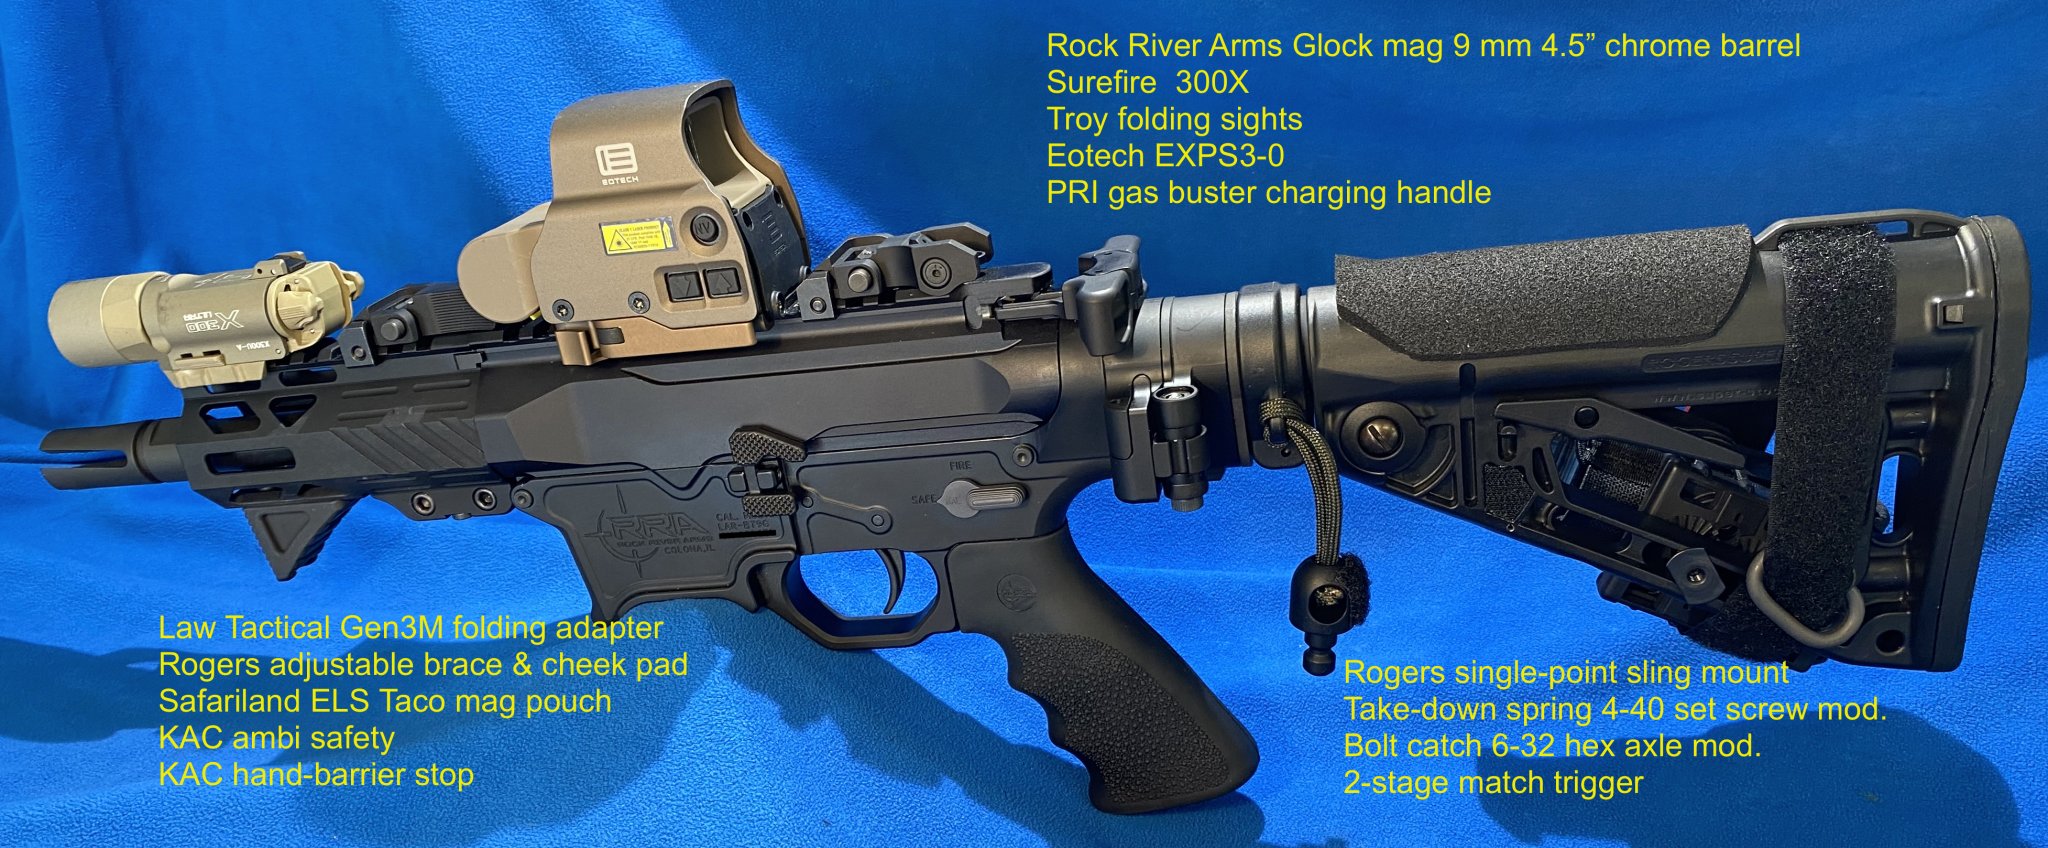 IMG_9026RRA 9 mm Rogers QD Sling 05.01.21 ANNOTATED WITH ROGERS SLING KAC BARRIER STOP copy.jpg